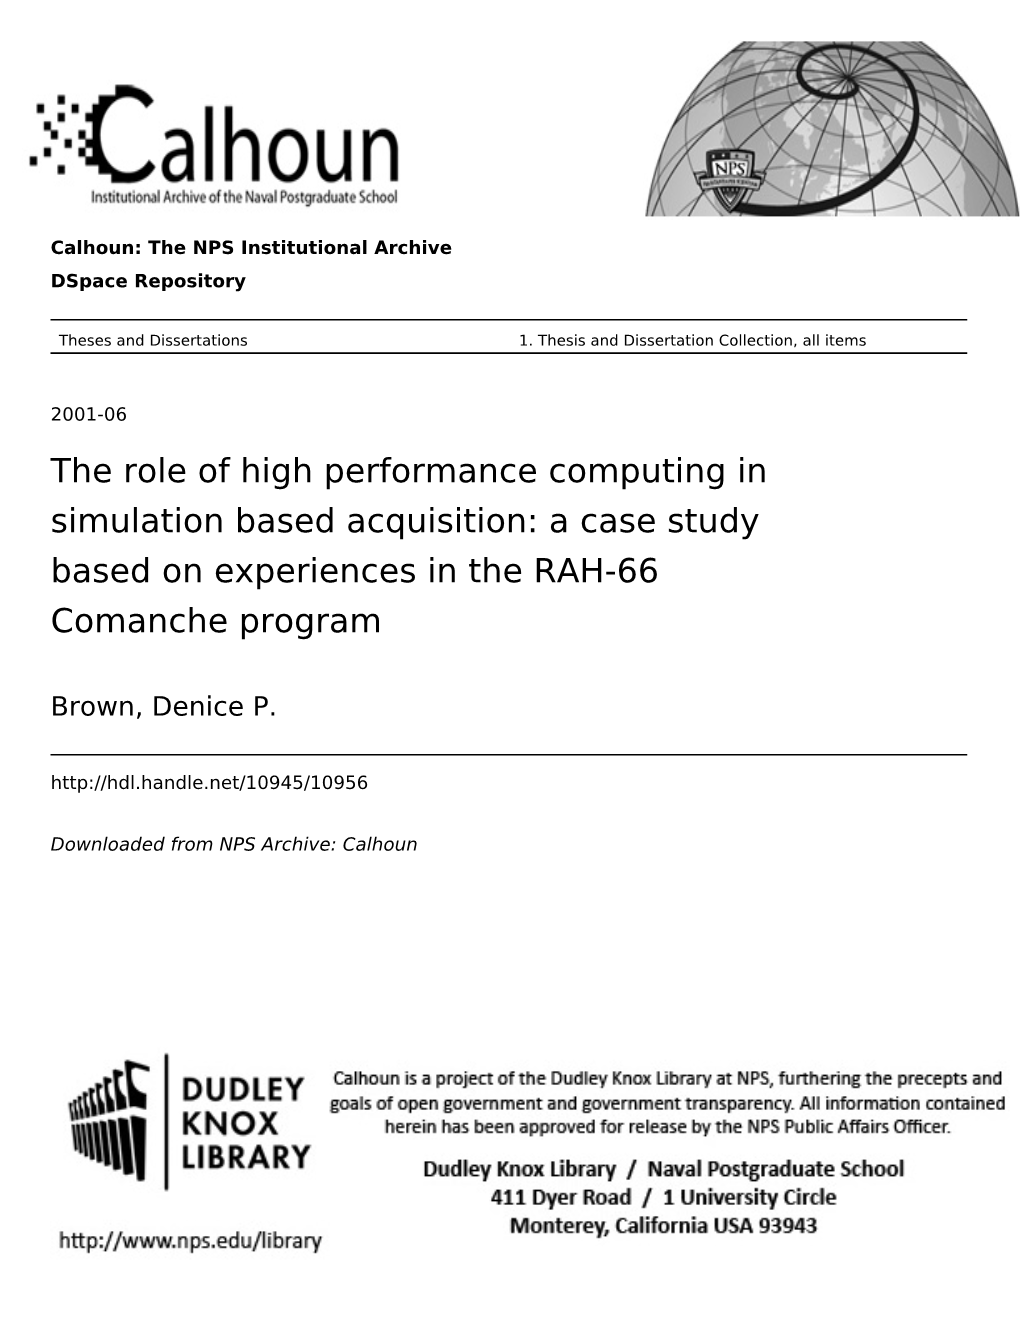 The Role of High Performance Computing in Simulation Based Acquisition: a Case Study Based on Experiences in the RAH-66 Comanche Program